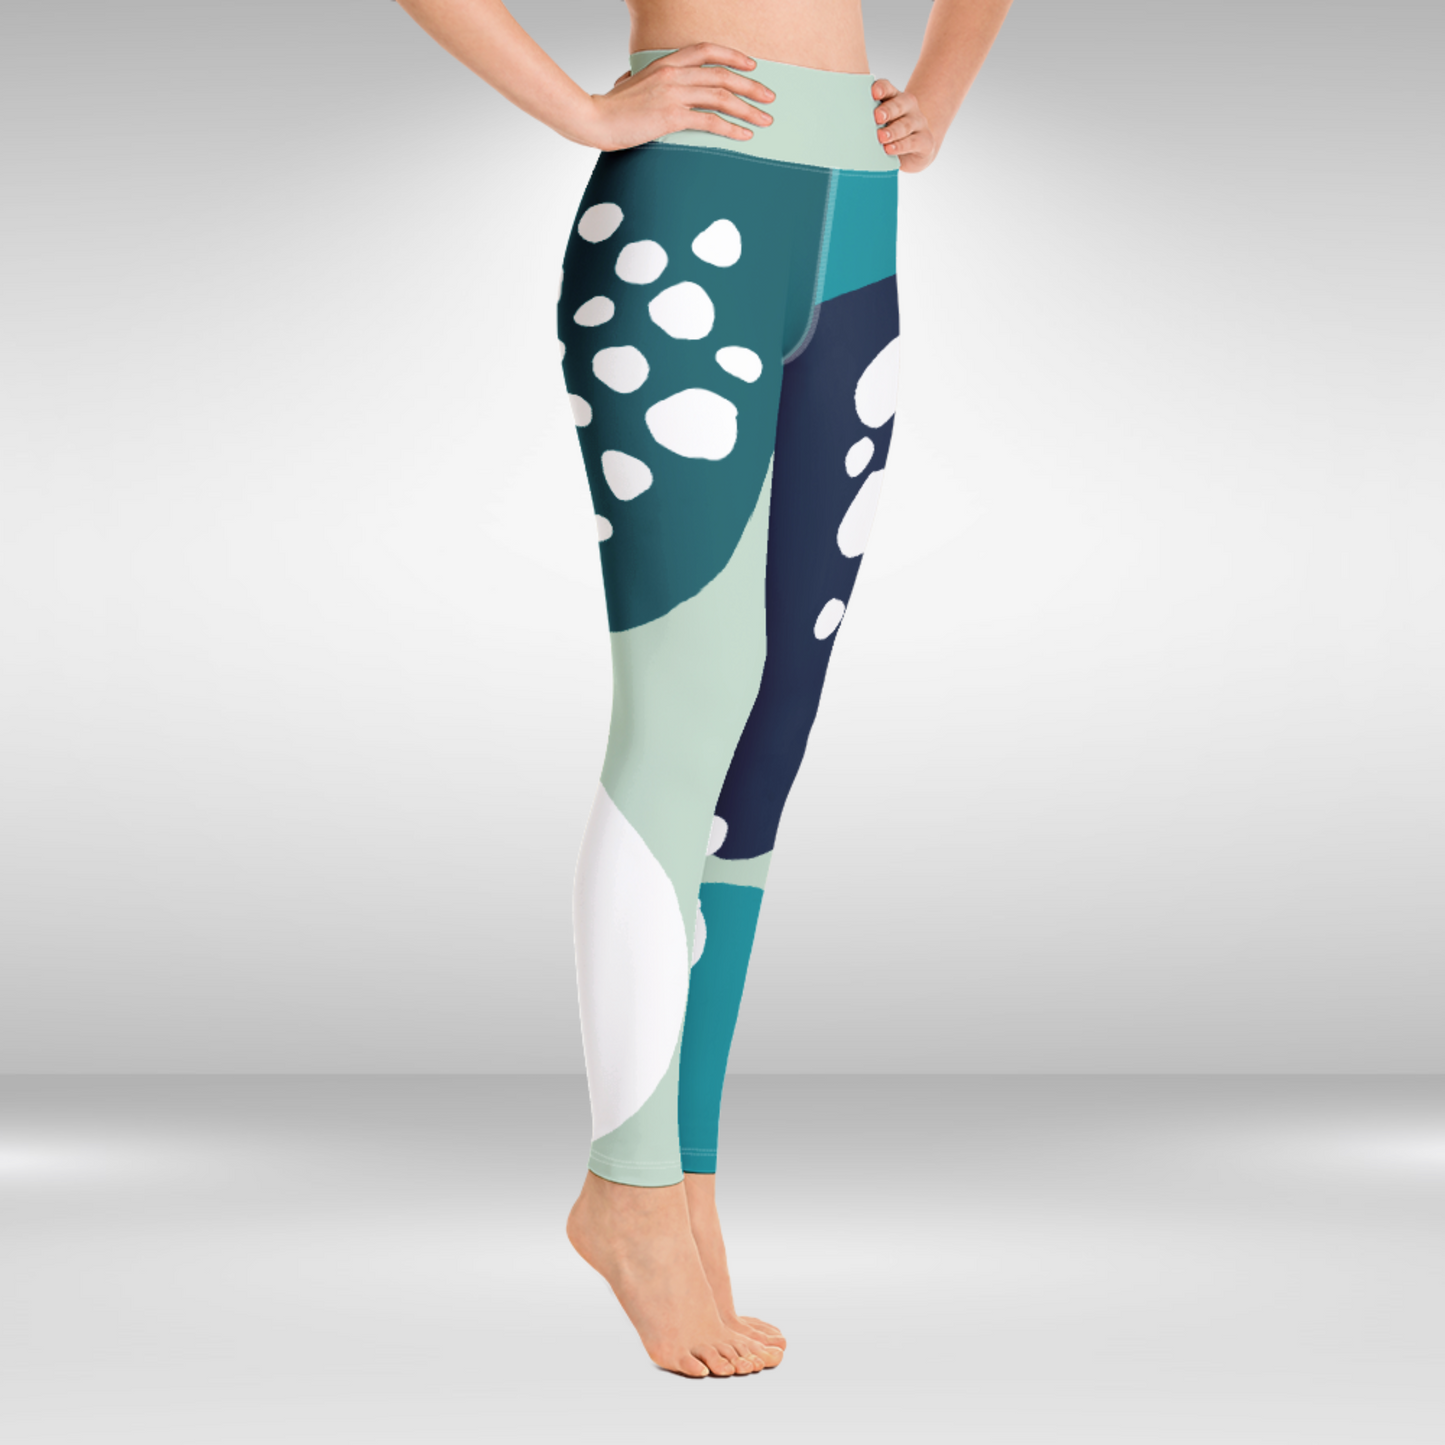 Women Yoga Legging - Blue and White Spots Abstract Print